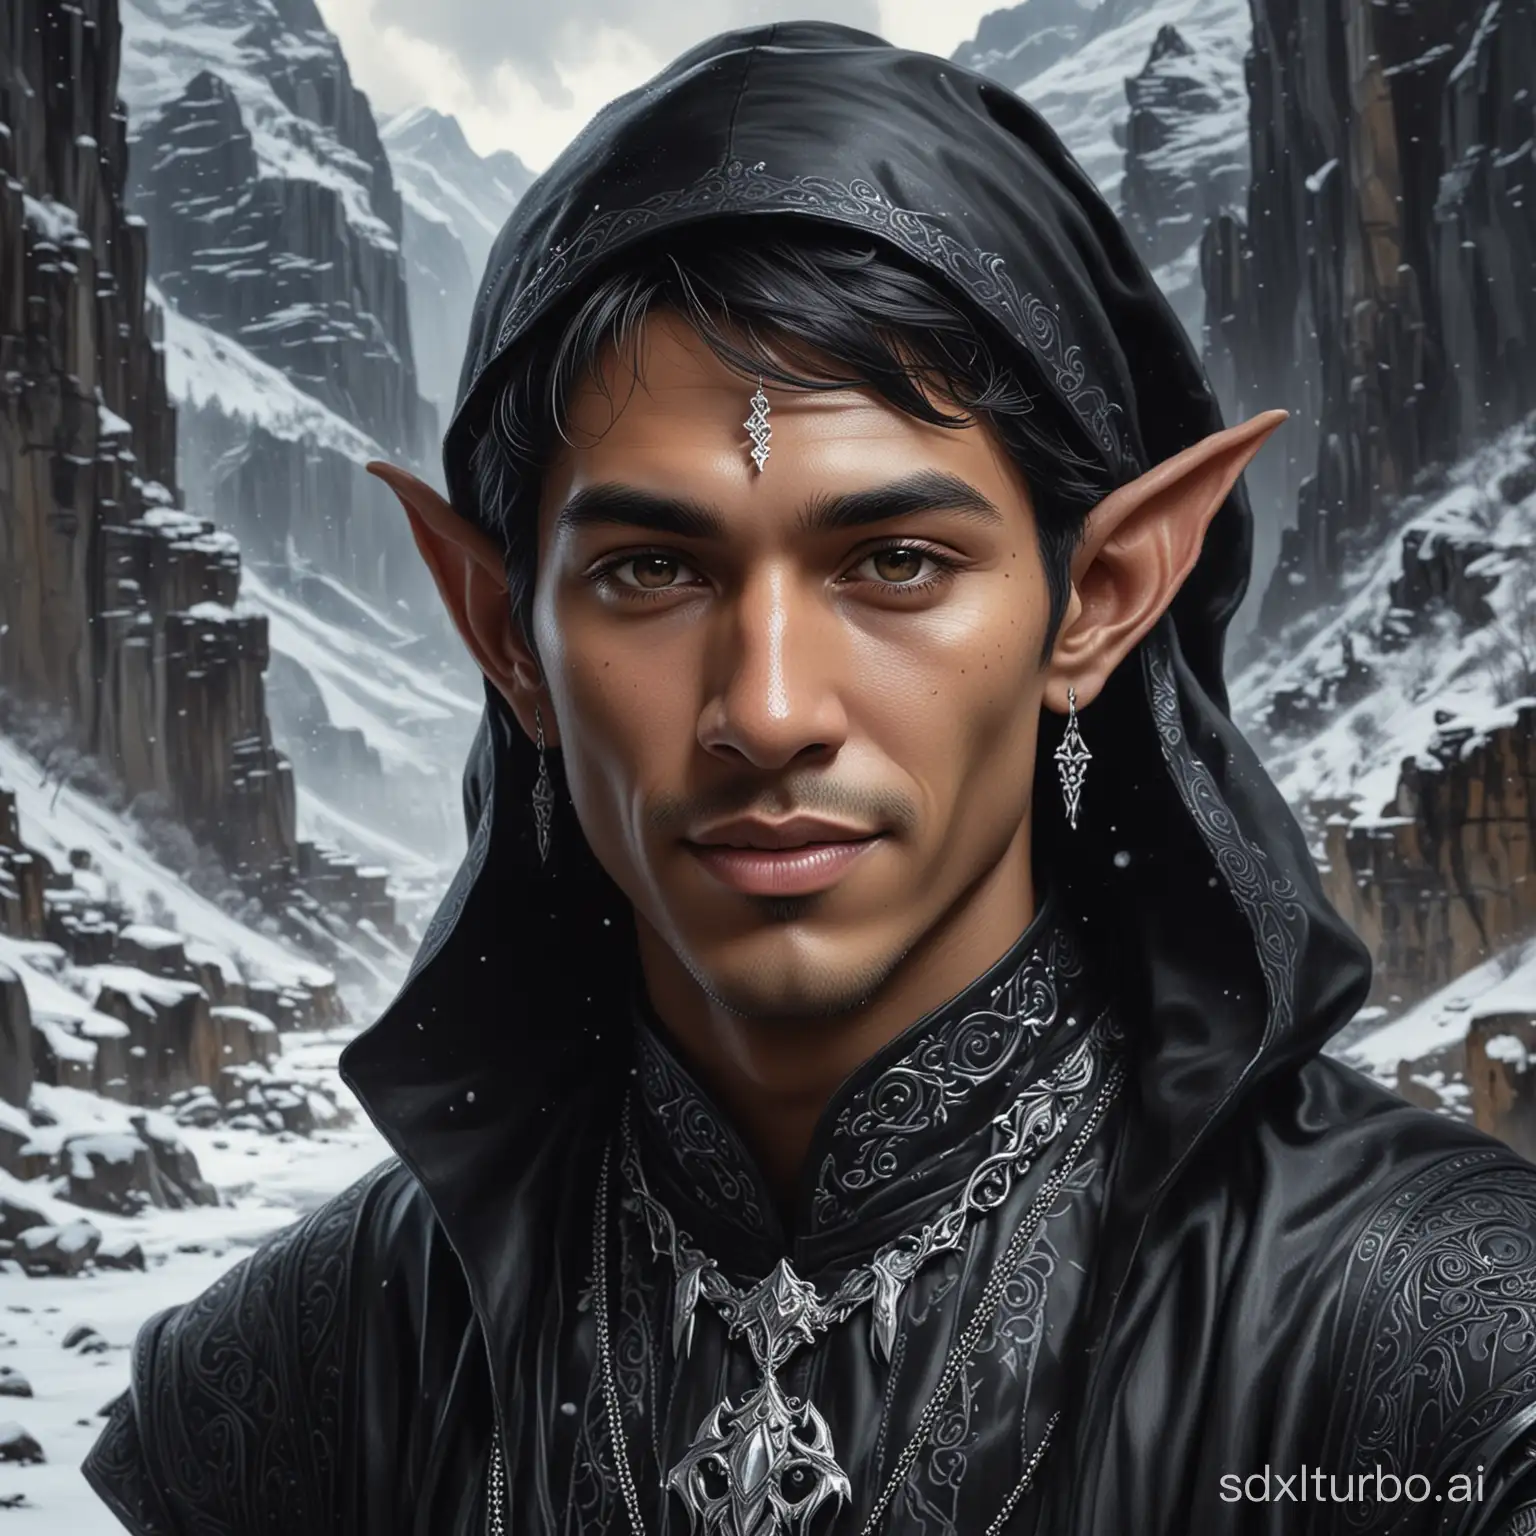 Stunning 4K airbrush oil painting of an Indonesian elf man. He wore a long, dark black coat and wore a metallic necklace with an intricate design. His face was partially hidden by a hood, and his sharp gaze was focused on the task at hand while smiling slightly, revealing his canine teeth. The background features a snowy winter canyon with icy cliffs and a dark and mysterious atmosphere. Portraits are created with an emphasis on the contrast between the character's features.